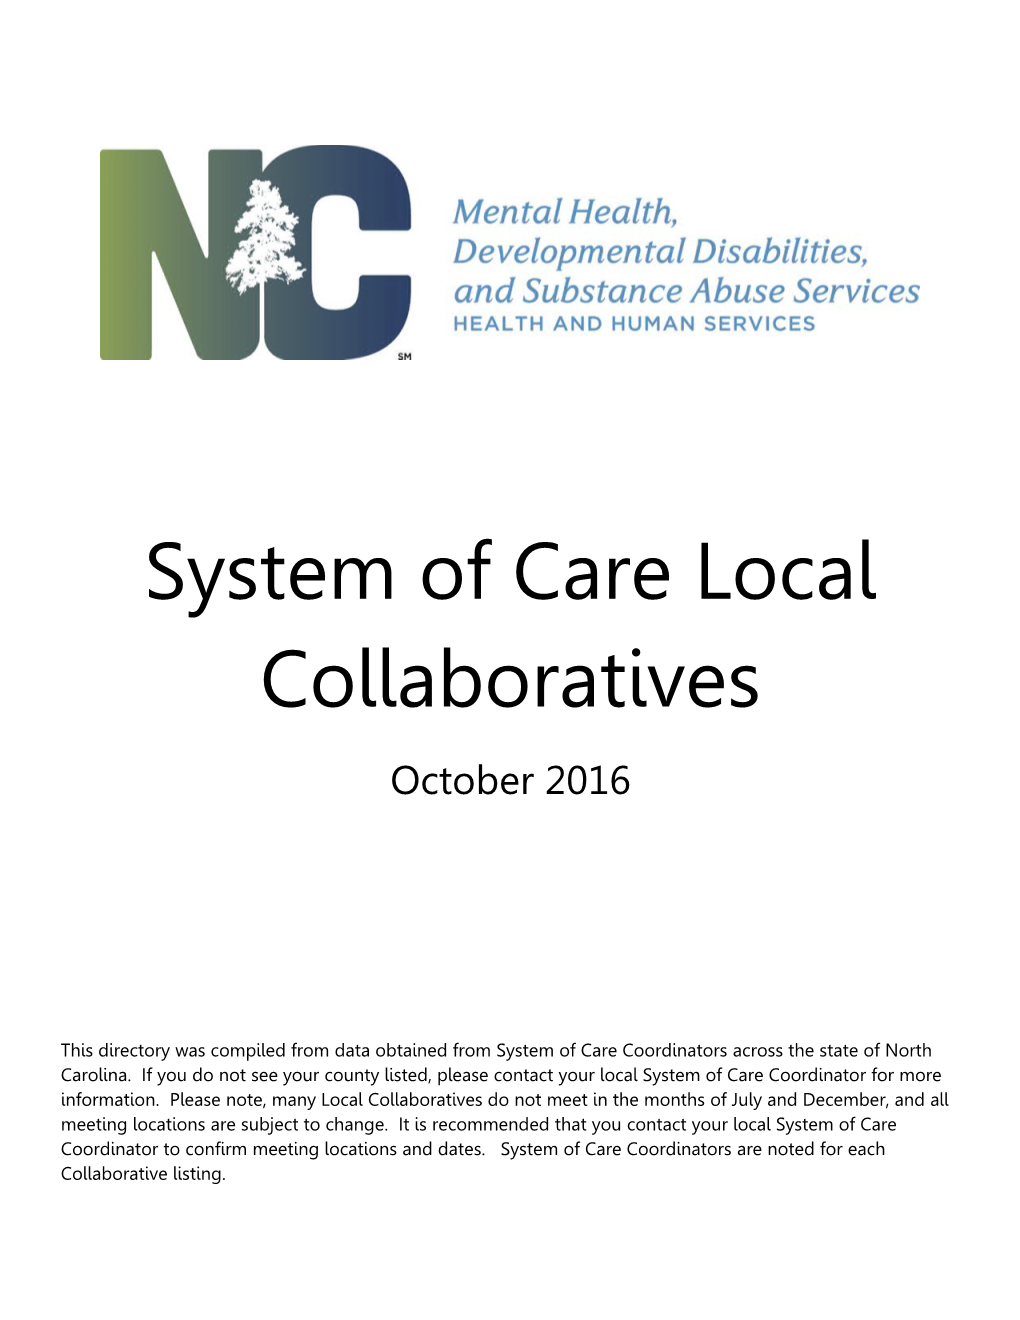 System of Care Local Collaboratives